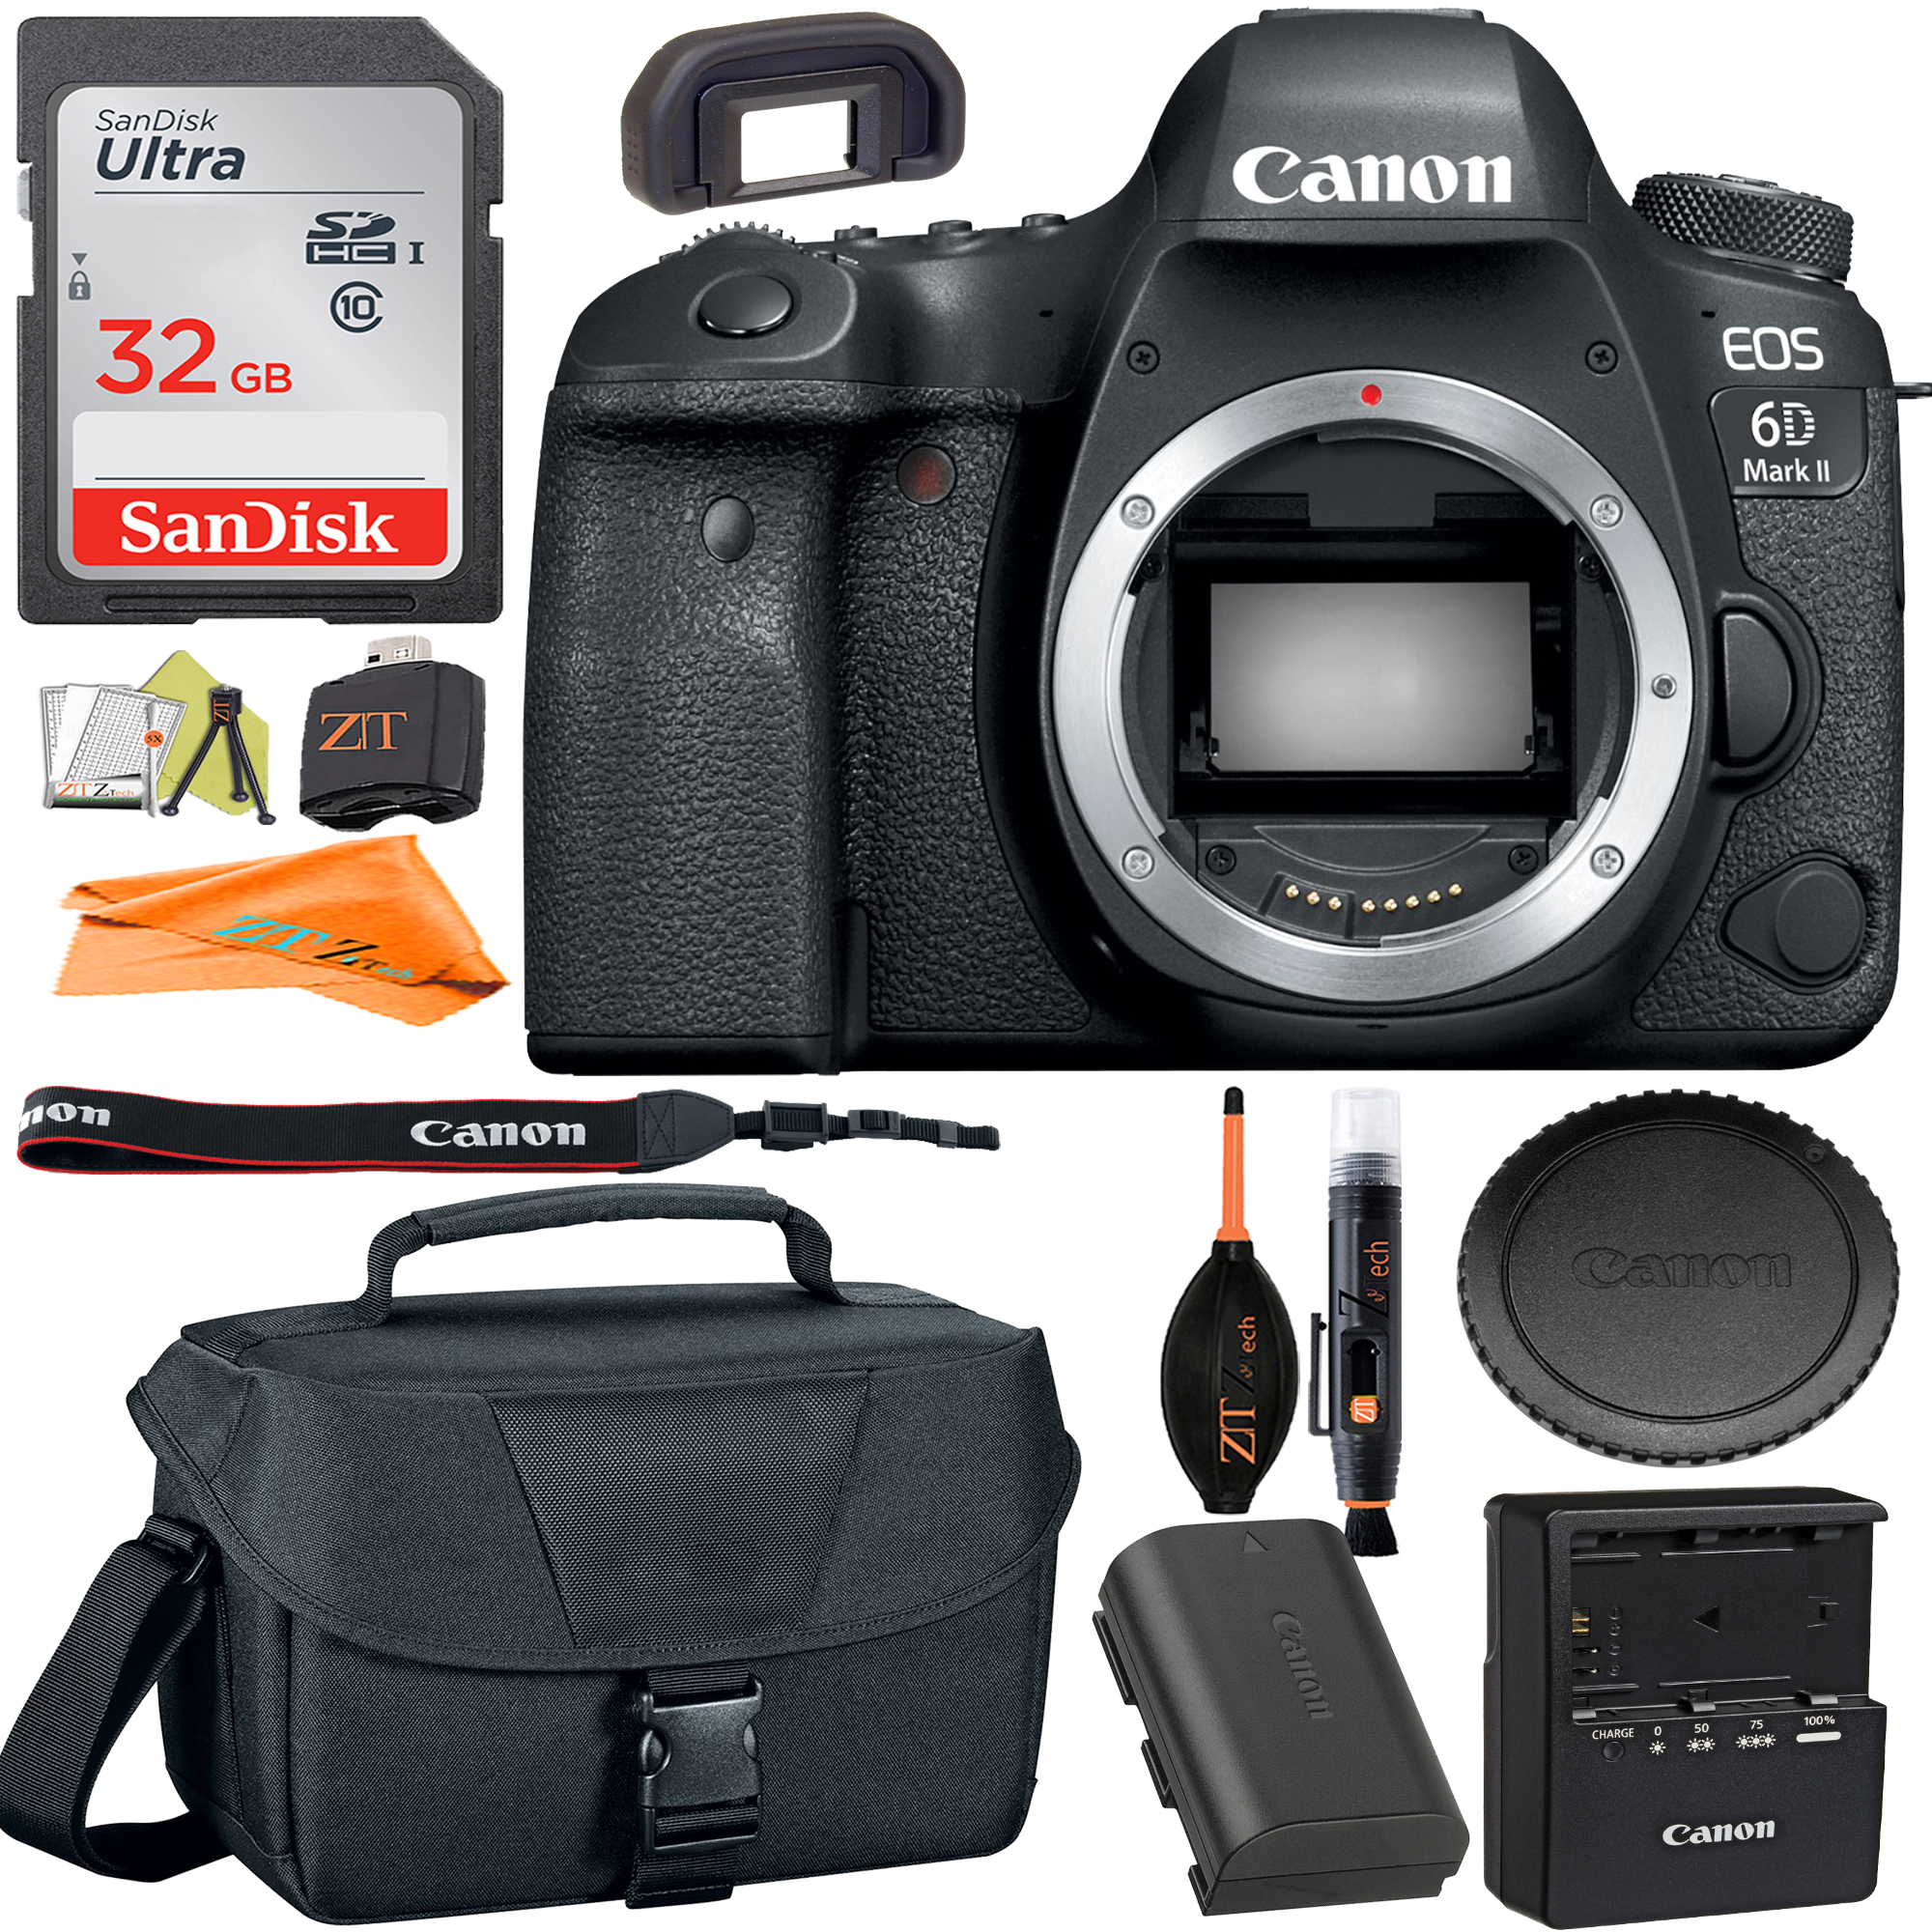 Canon EOS 6D Mark II DSLR Camera (Body Only) with SanDisk 32GB Card + Case + ZeeTech Accessory Bundle